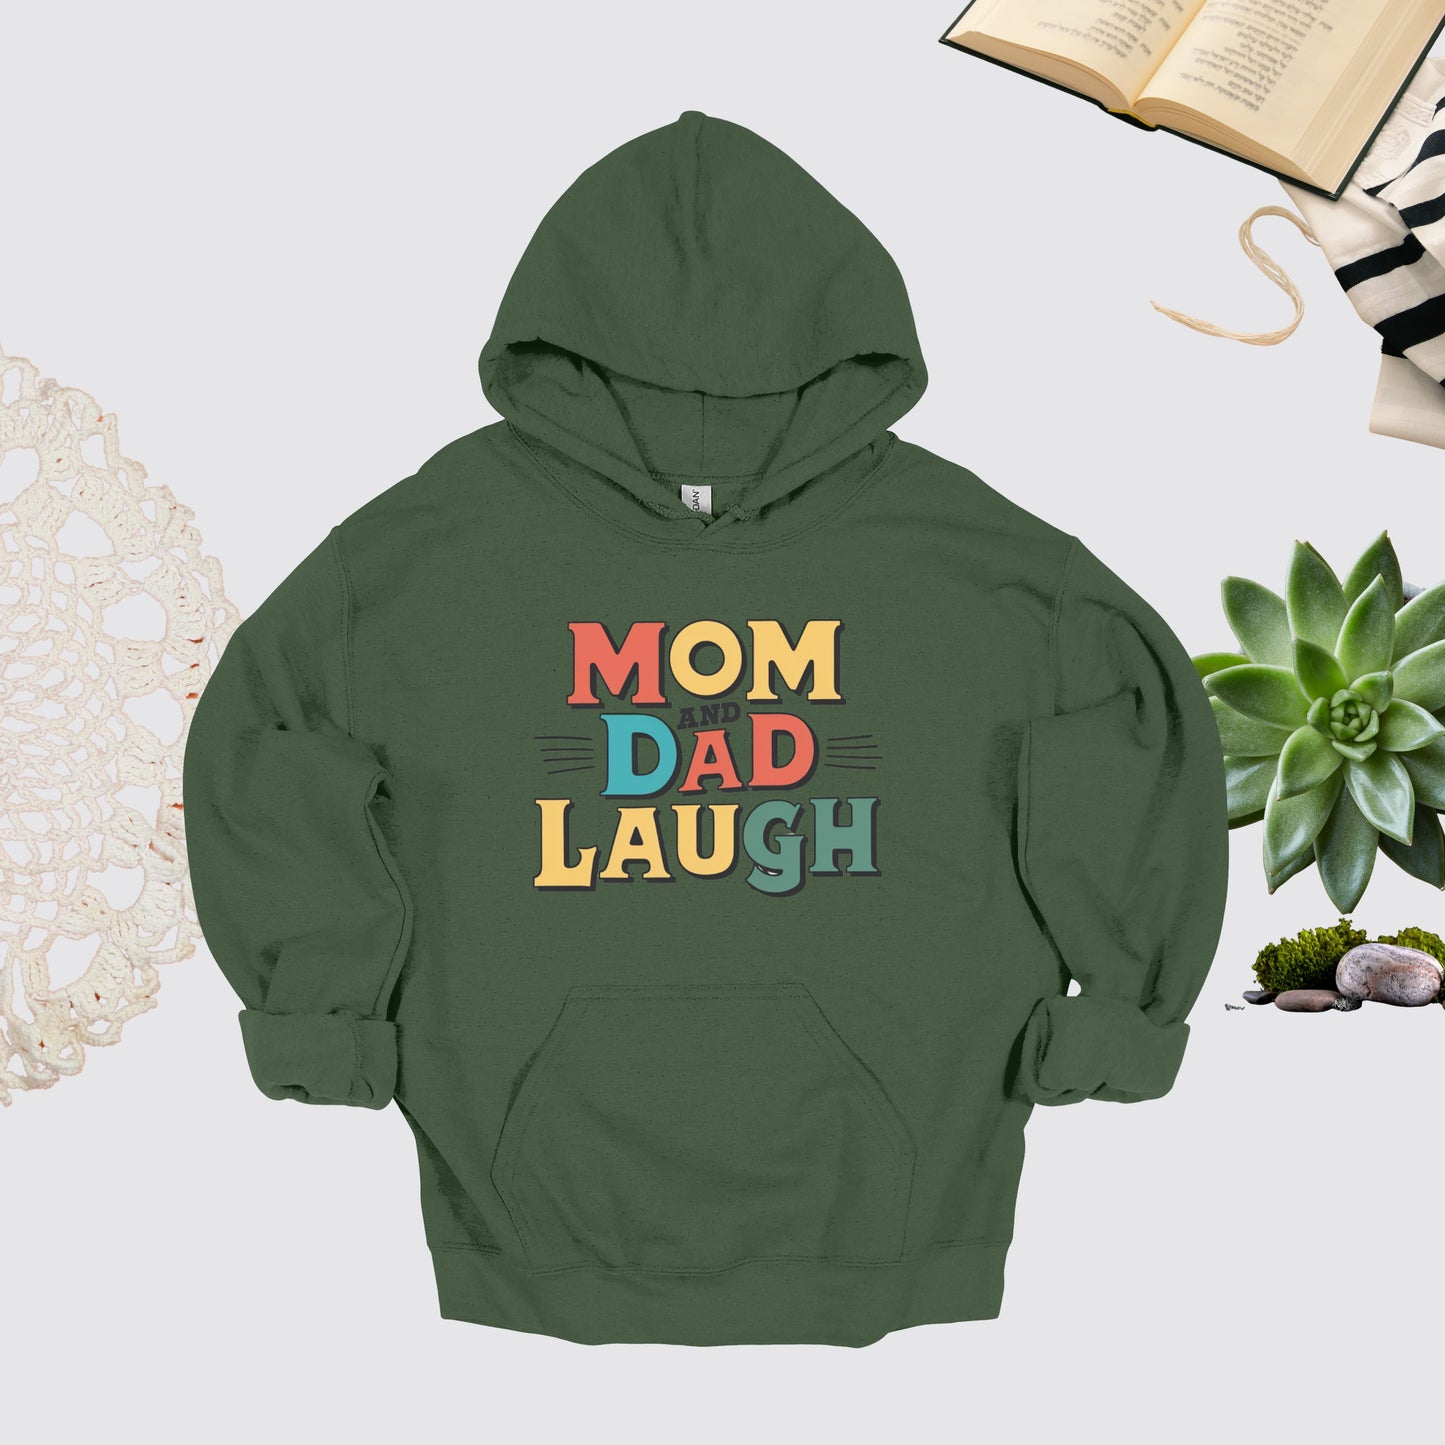 Mom and Dad Military Green Hoodie